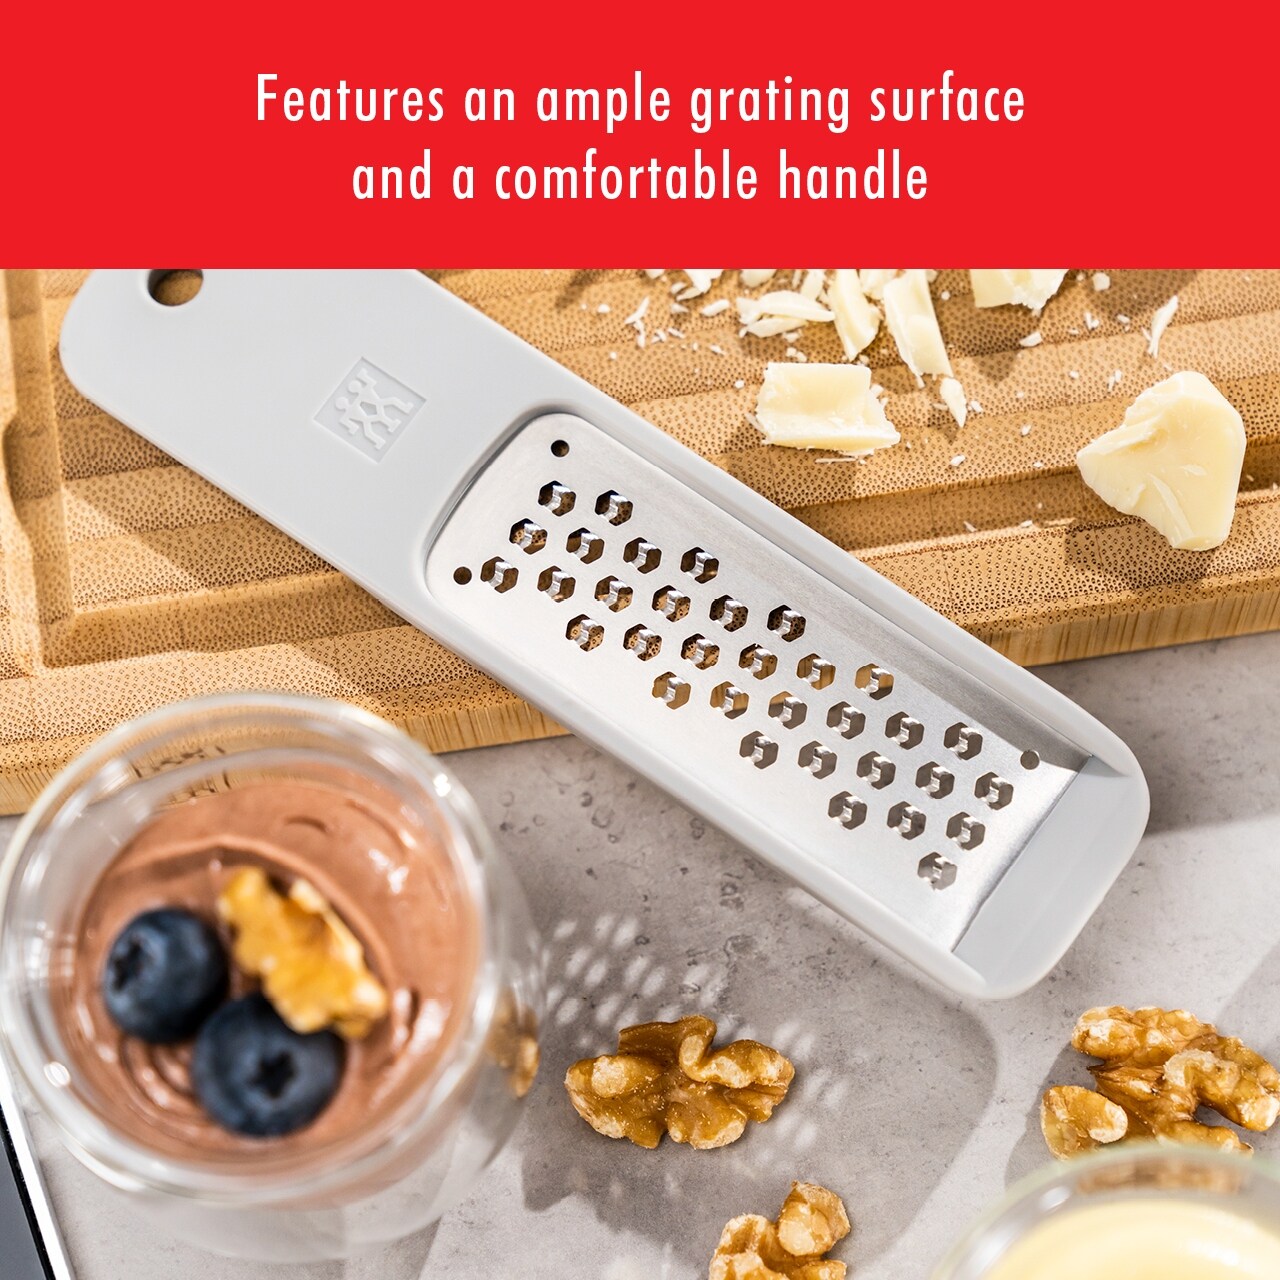 https://ak1.ostkcdn.com/images/products/is/images/direct/6f234898e63a1f3d383dcfbbea7f1447d8563b17/ZWILLING-Z-Cut-Mini-Grater.jpg